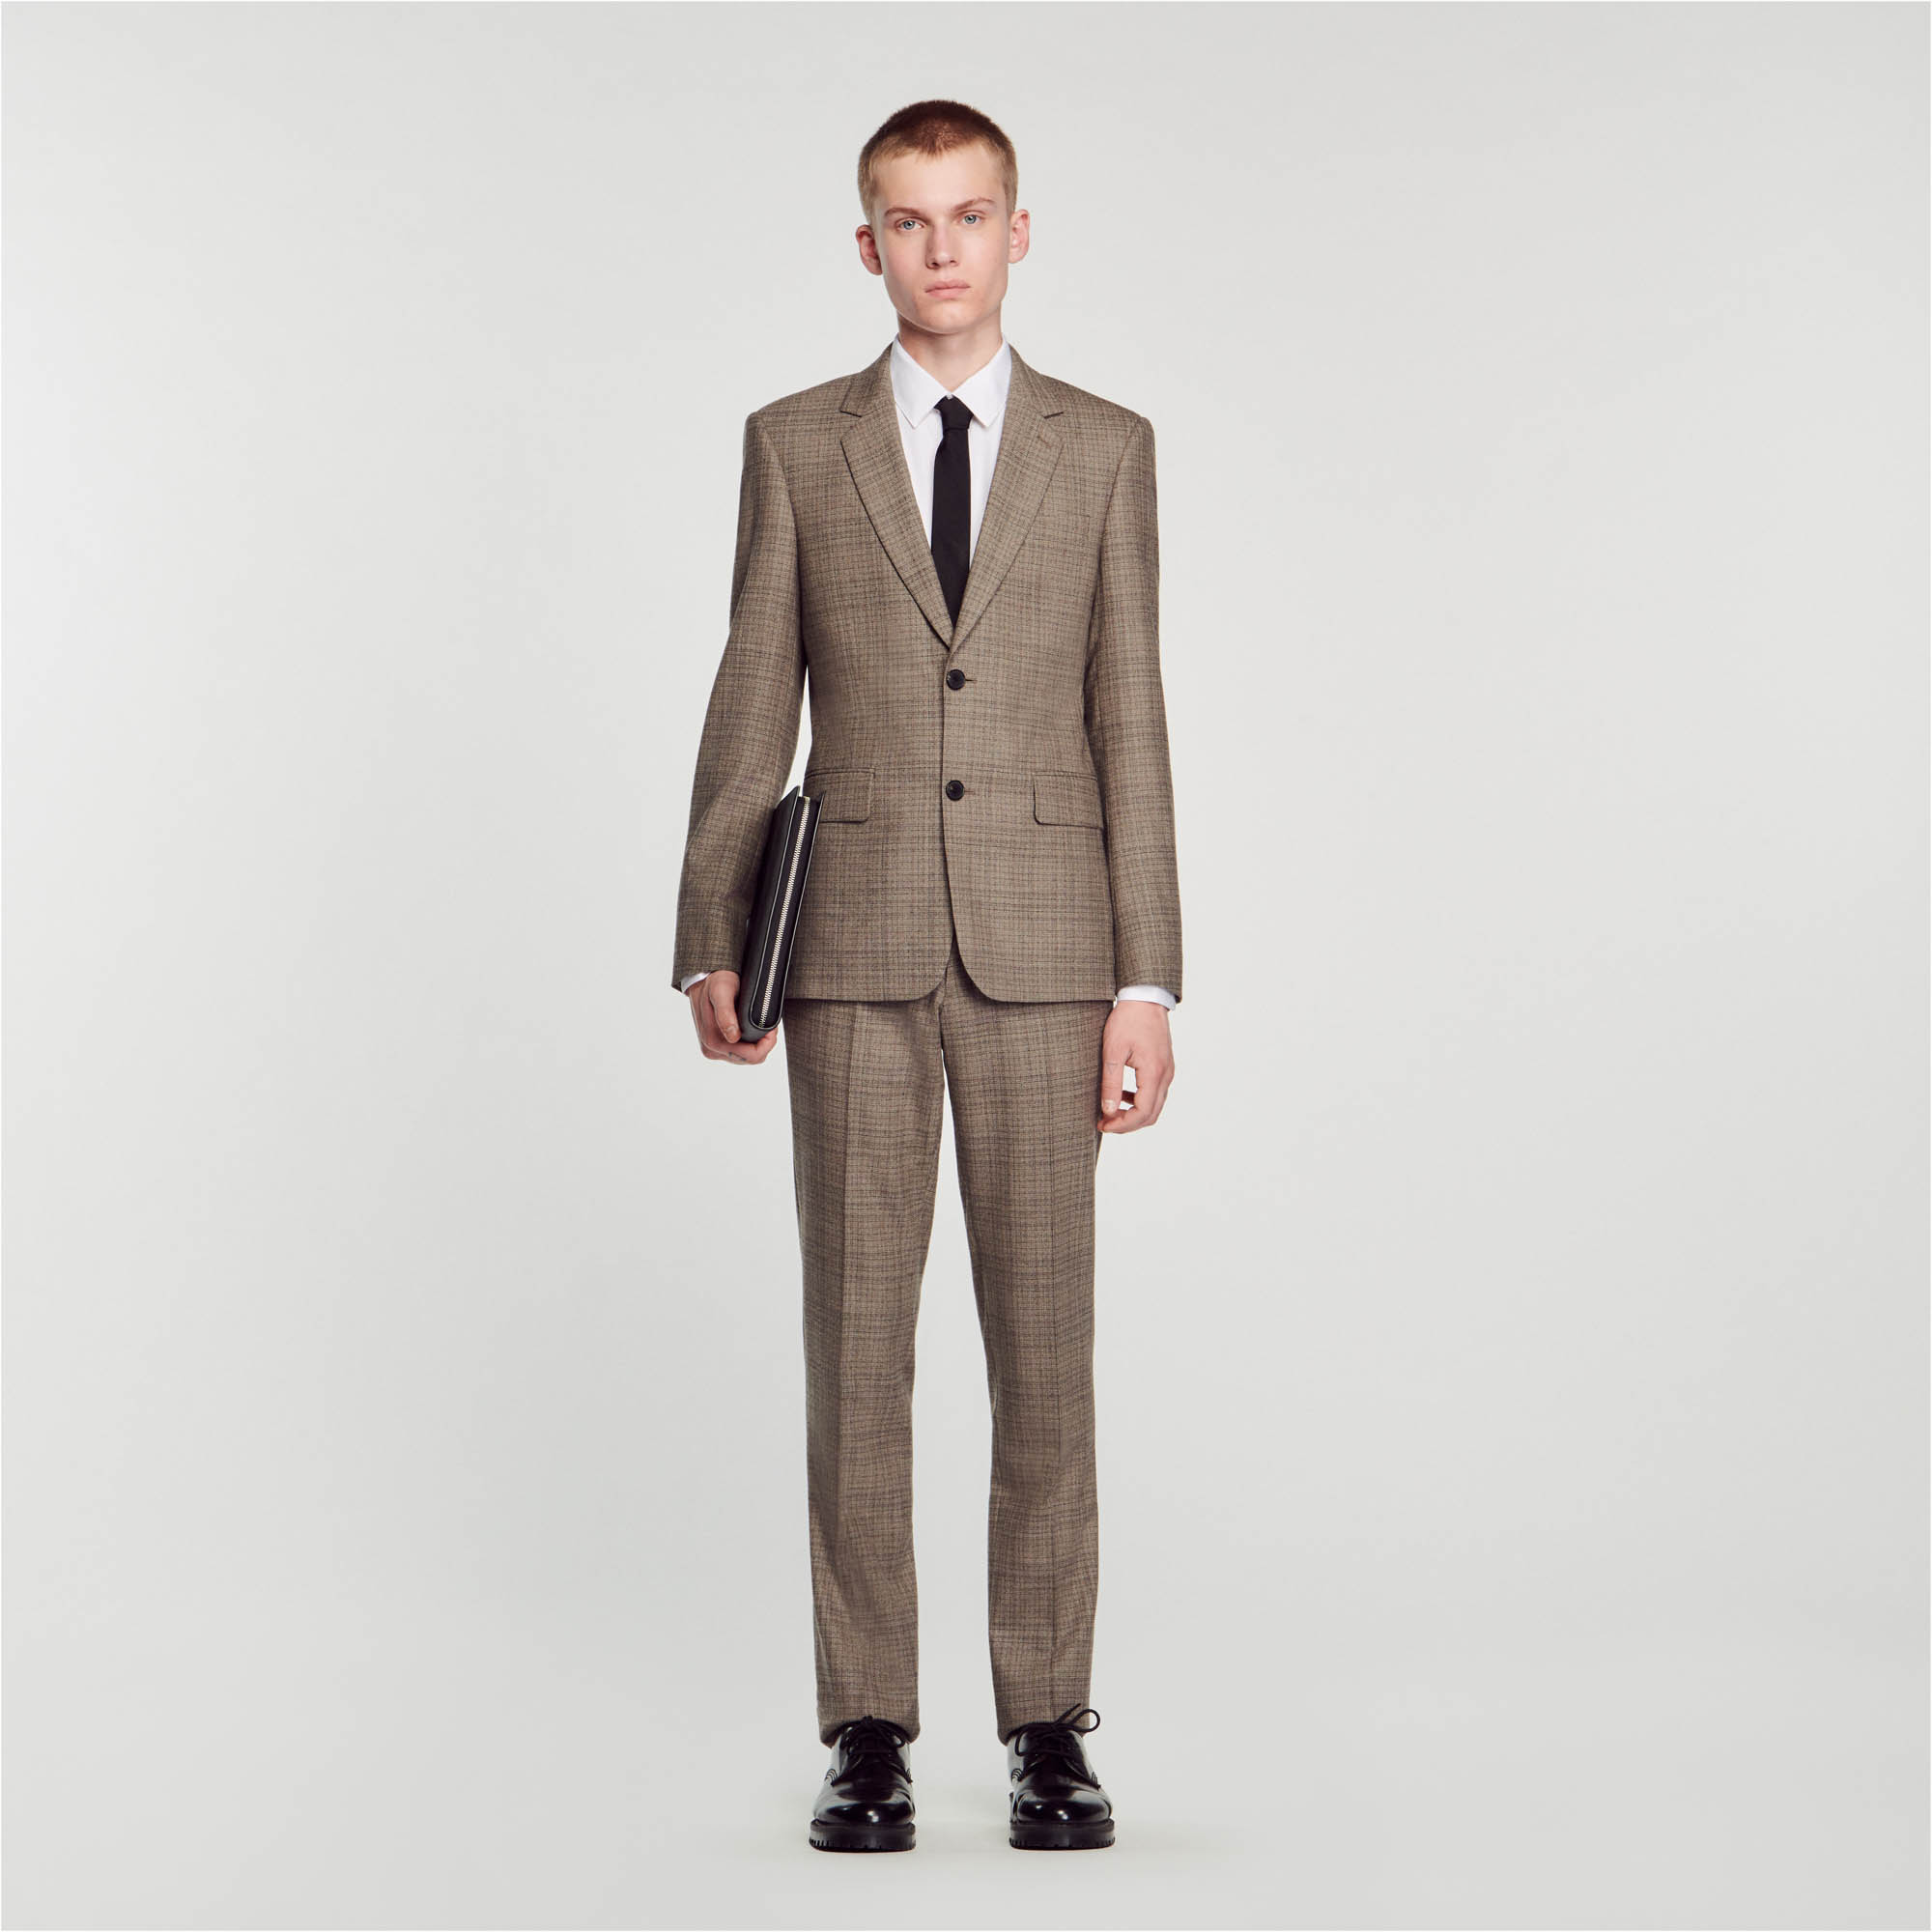 Sandro virgin wool Wool suit jacket with oversized collar, long sleeves, button fastening and flap pockets